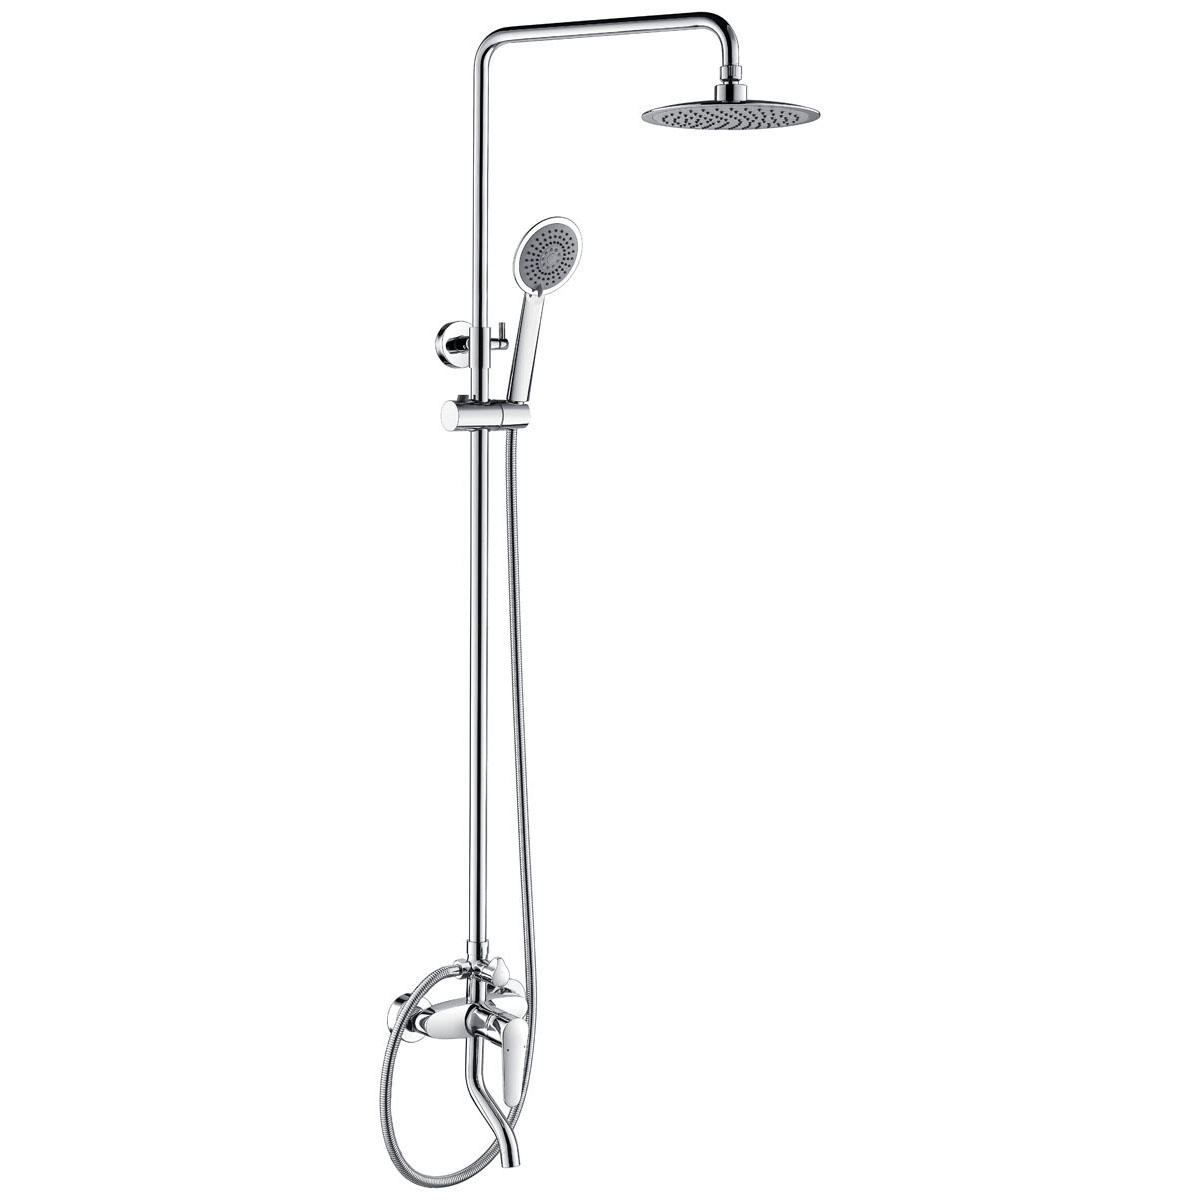 YS34262	Shower column, rain shower column with faucet and spout, height adjustable;